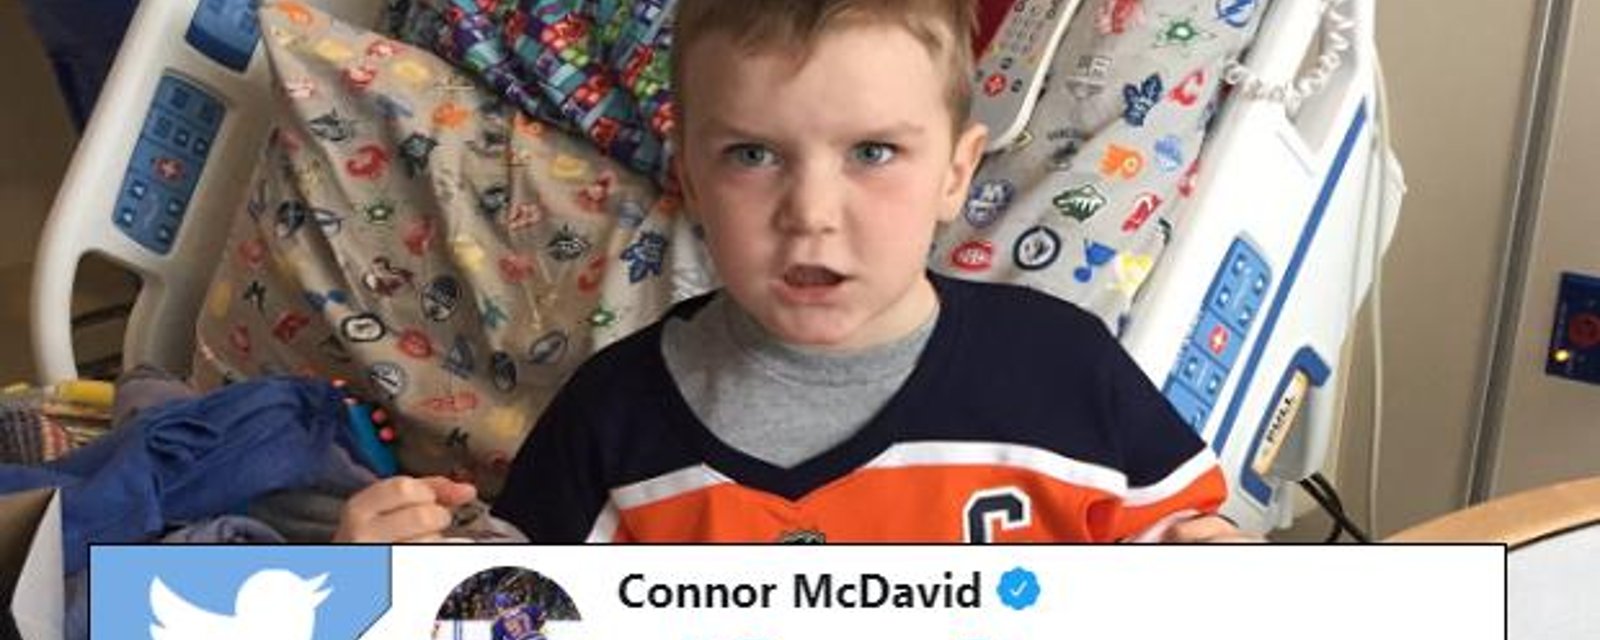 McDavid shares emotional tweet after young Leukemia patient received his jersey for Christmas